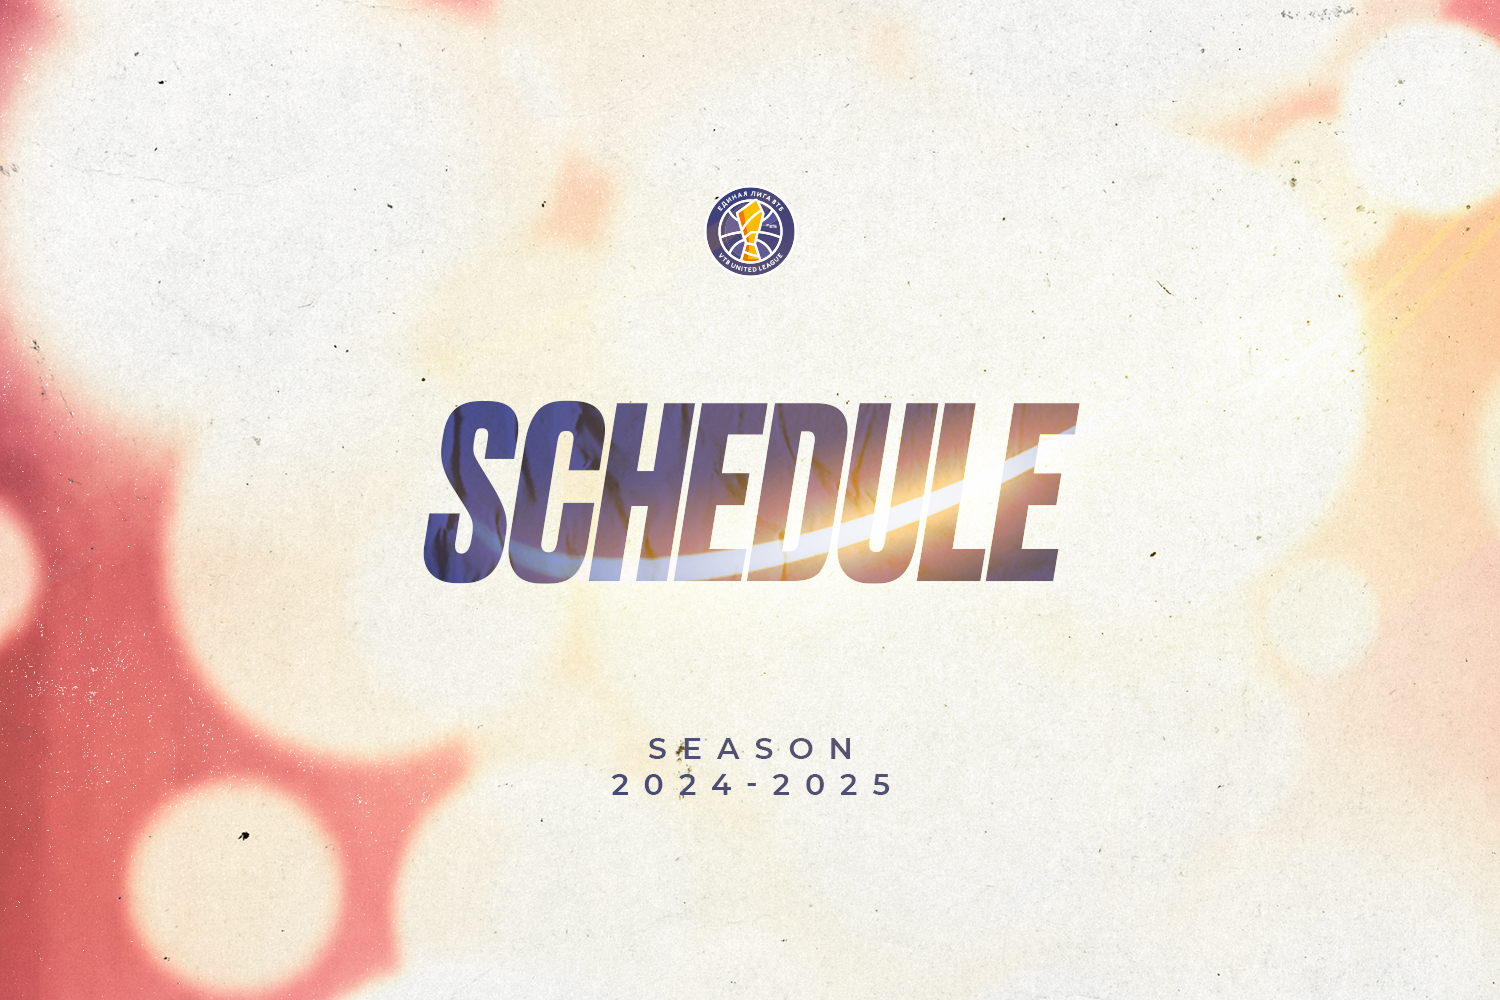 2024/25 season schedule has been approved